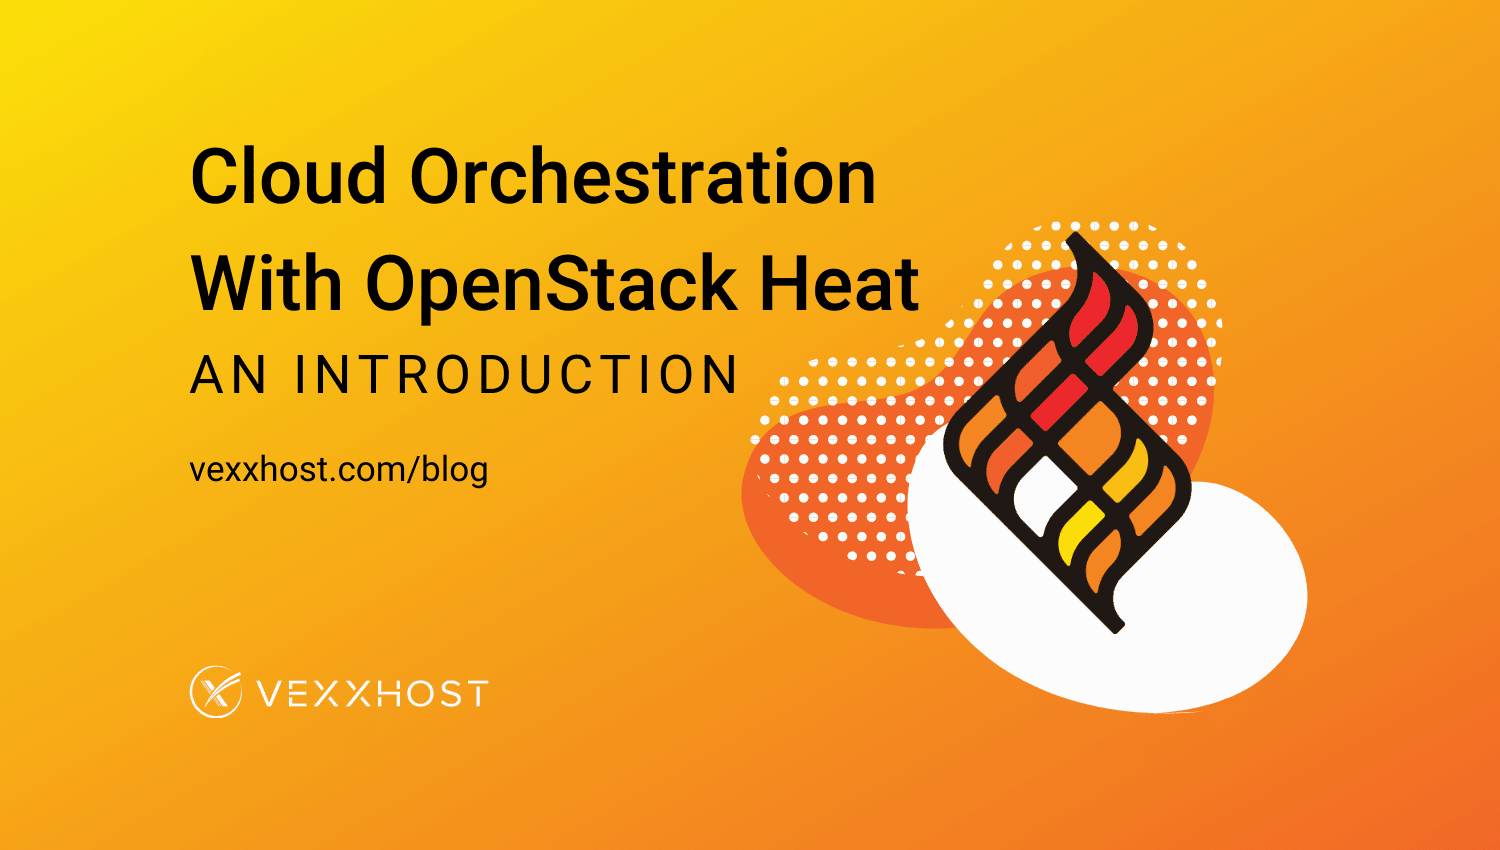 Cloud Orchestration with OpenStack Heat - An Introduction